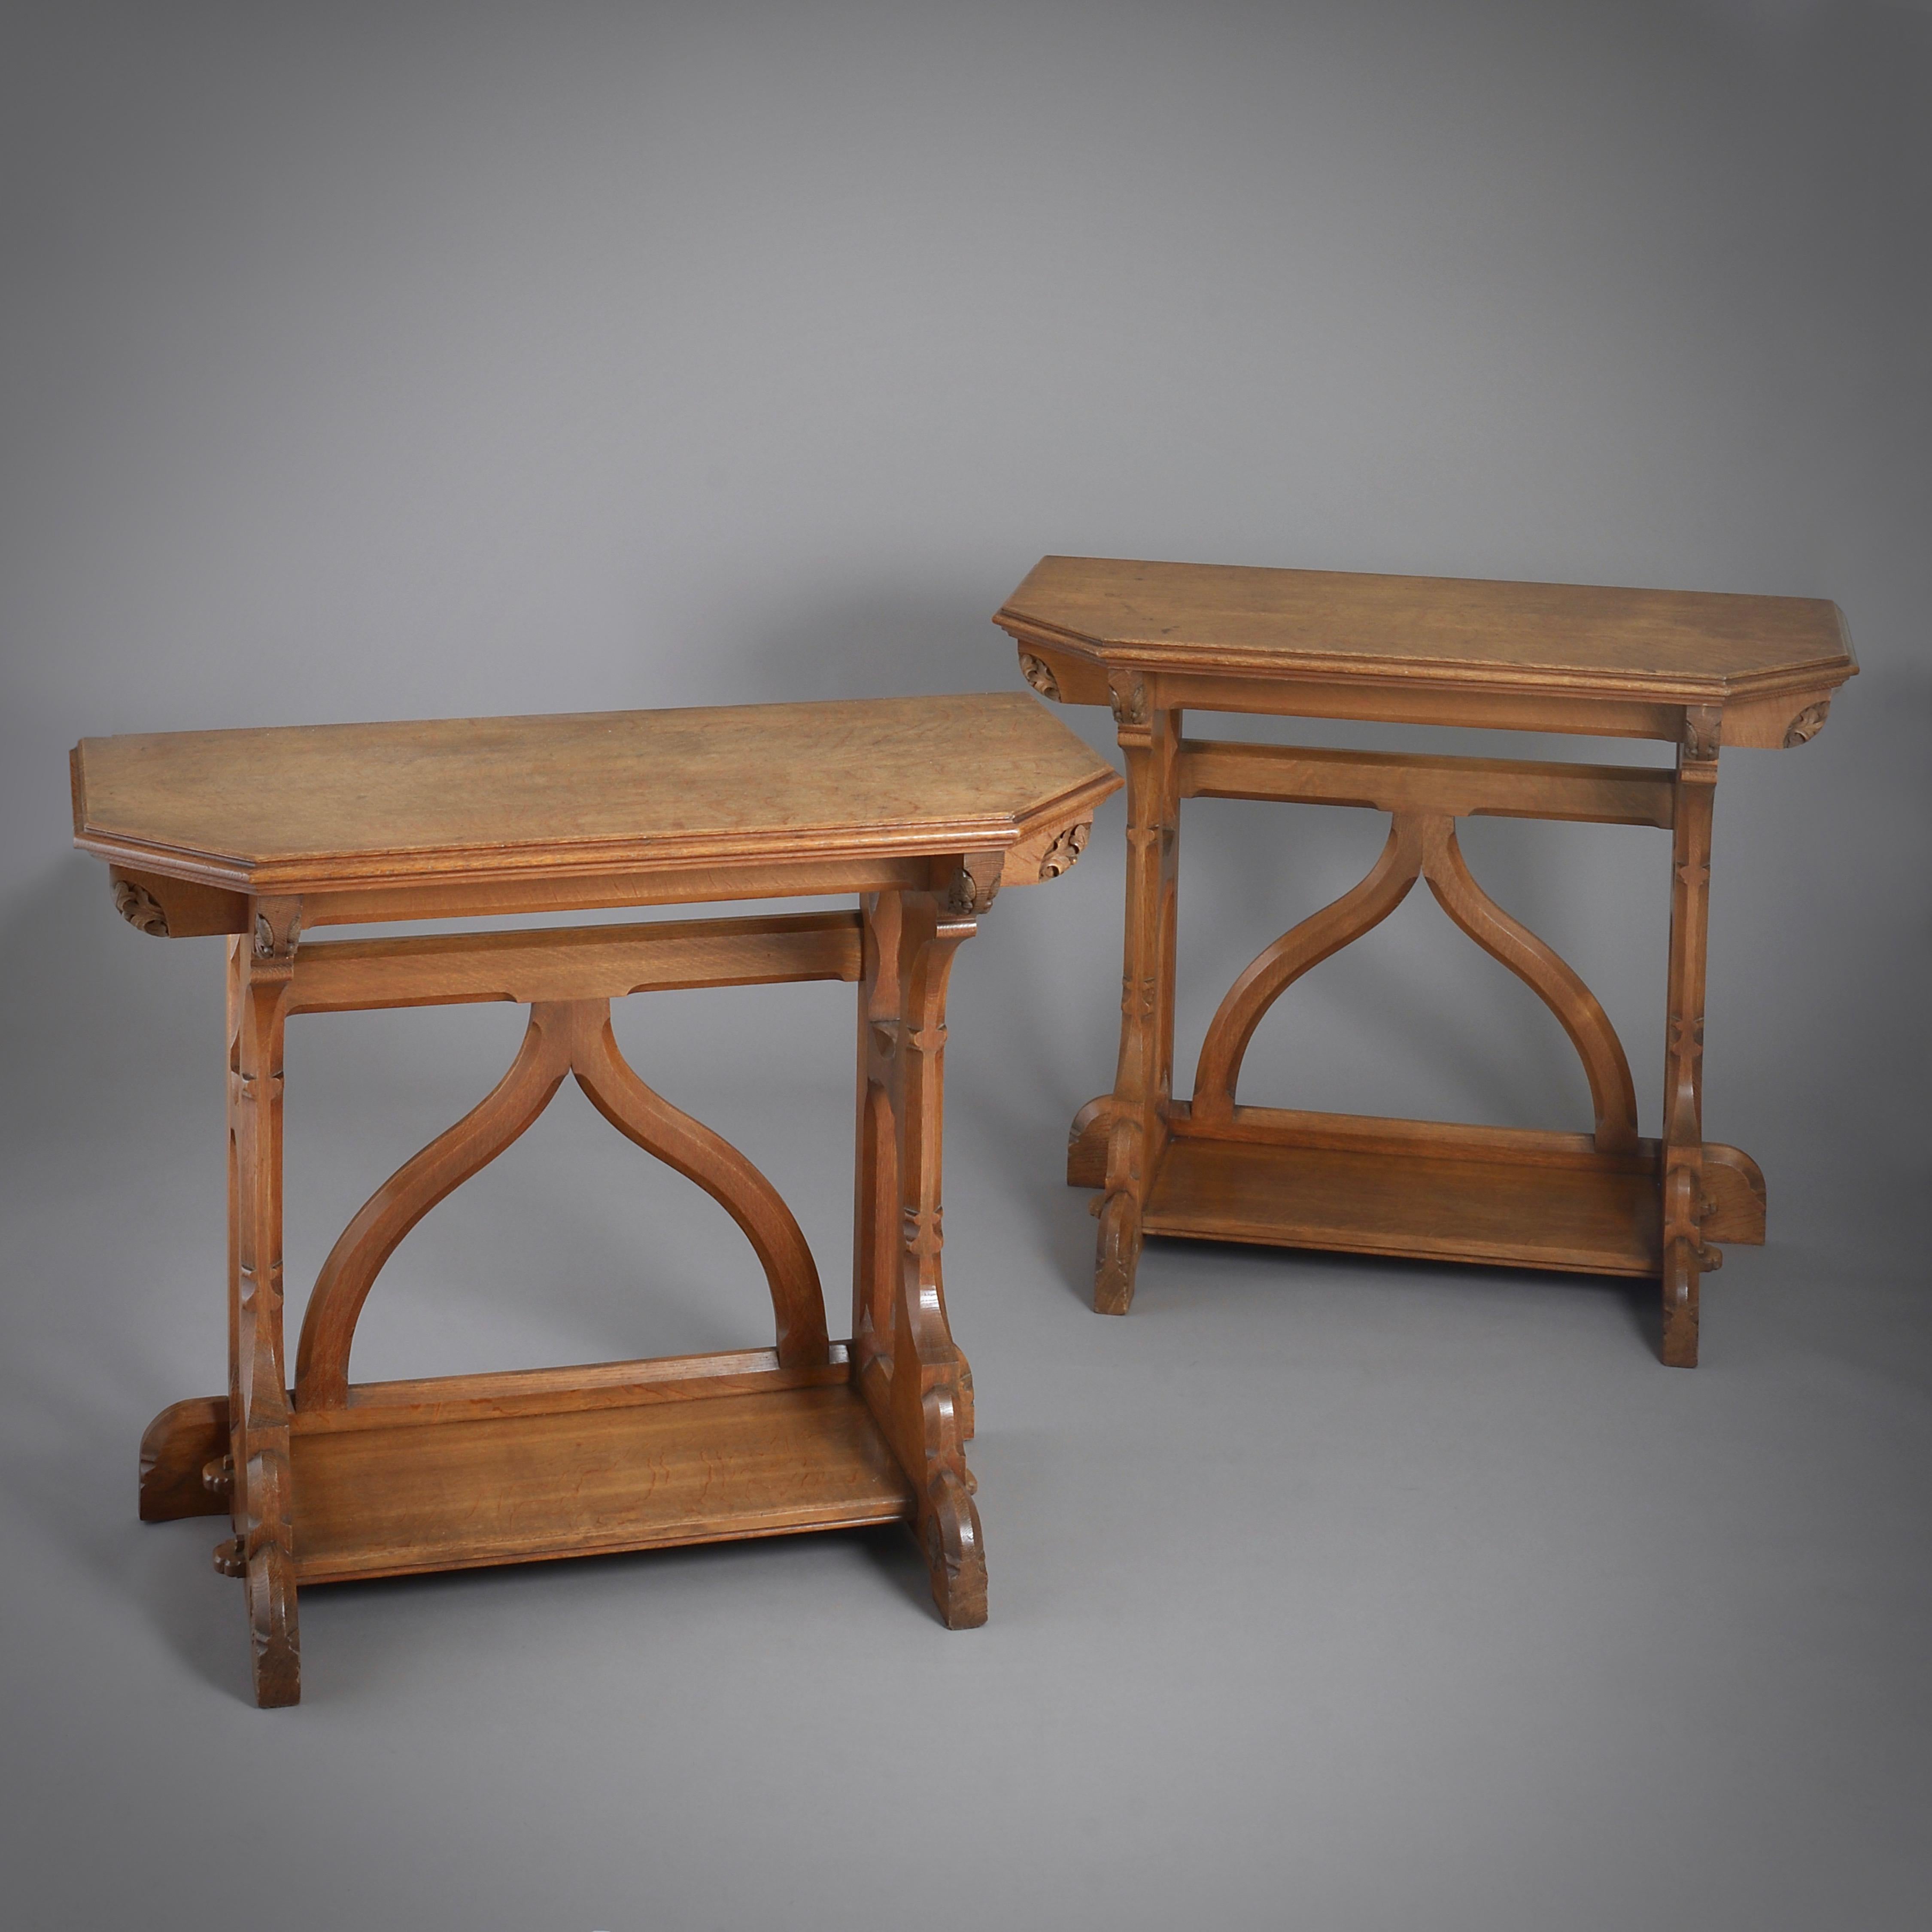 An important pair of early Victorian oak side tables, the design attributed to A.W.N. Pugin and the manufacture to J. G. Crace, circa 1850.

Provenance:
Abney Hall, Cheadle, Cheshire.